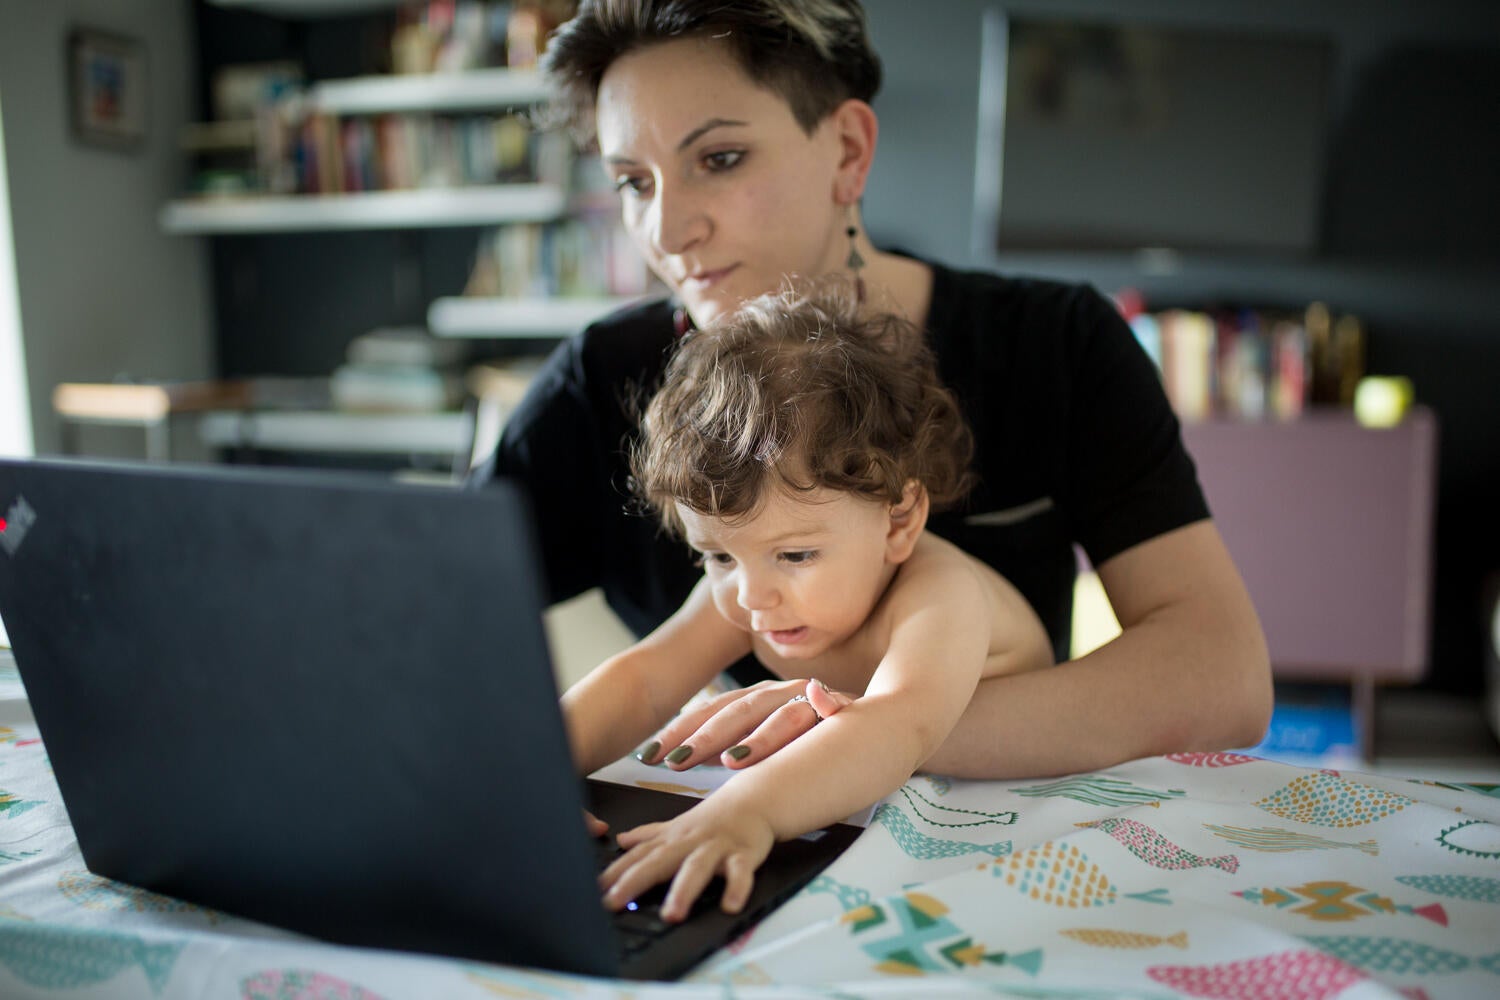 A woman is working on her laptop computer with a toddler on her lap. The toddles is aiming to use the computer's keyboard.